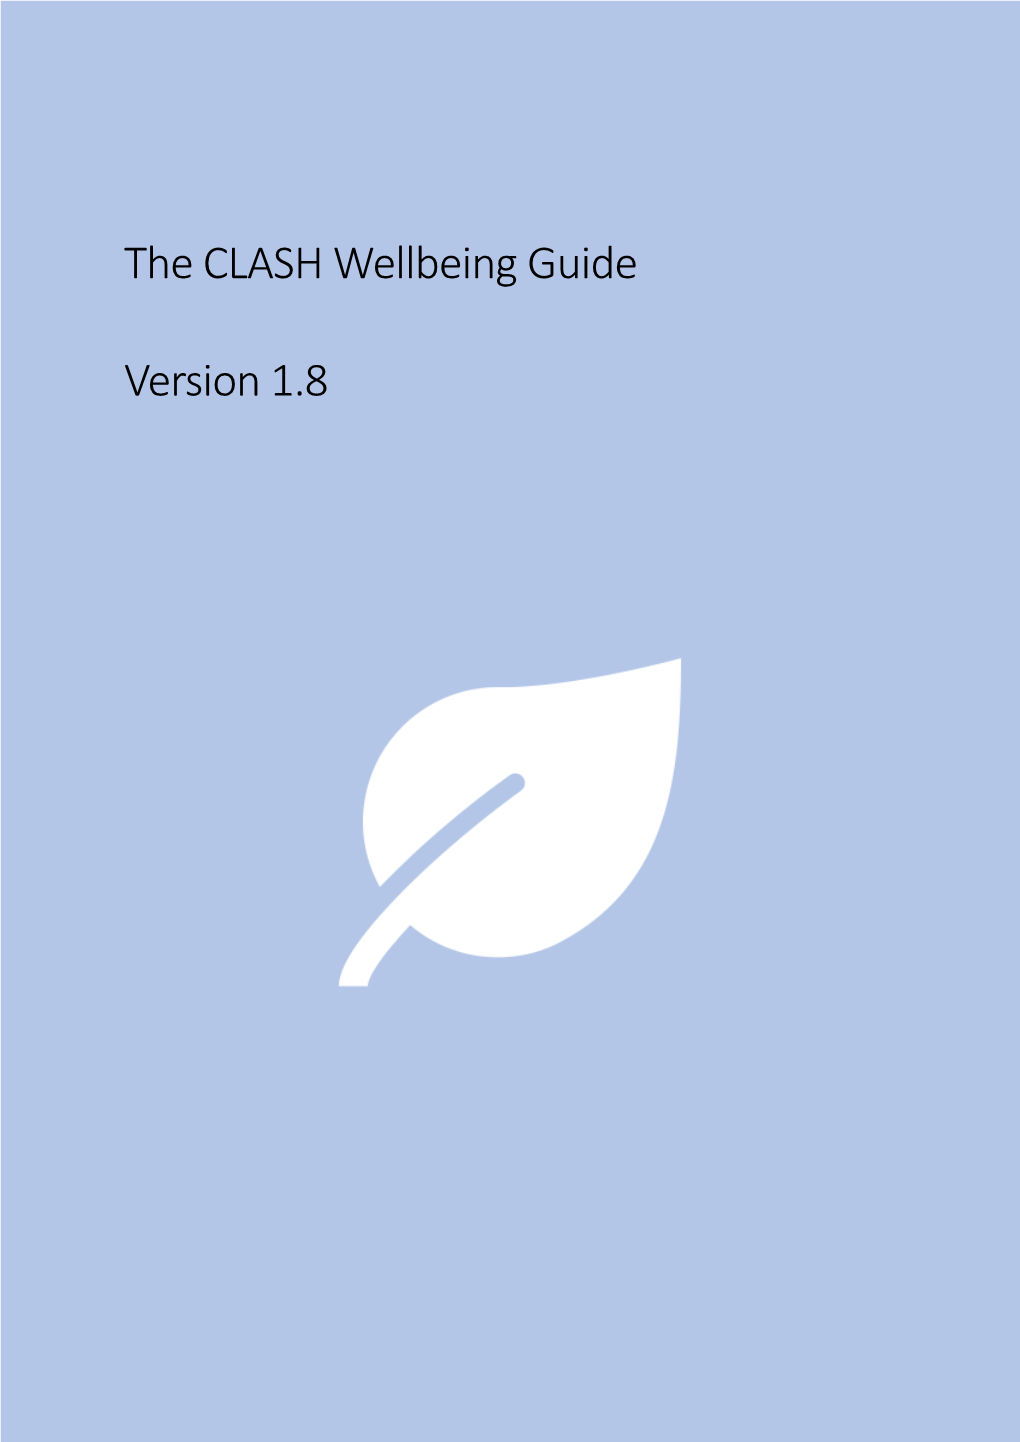 The CLASH Wellbeing Guide Version